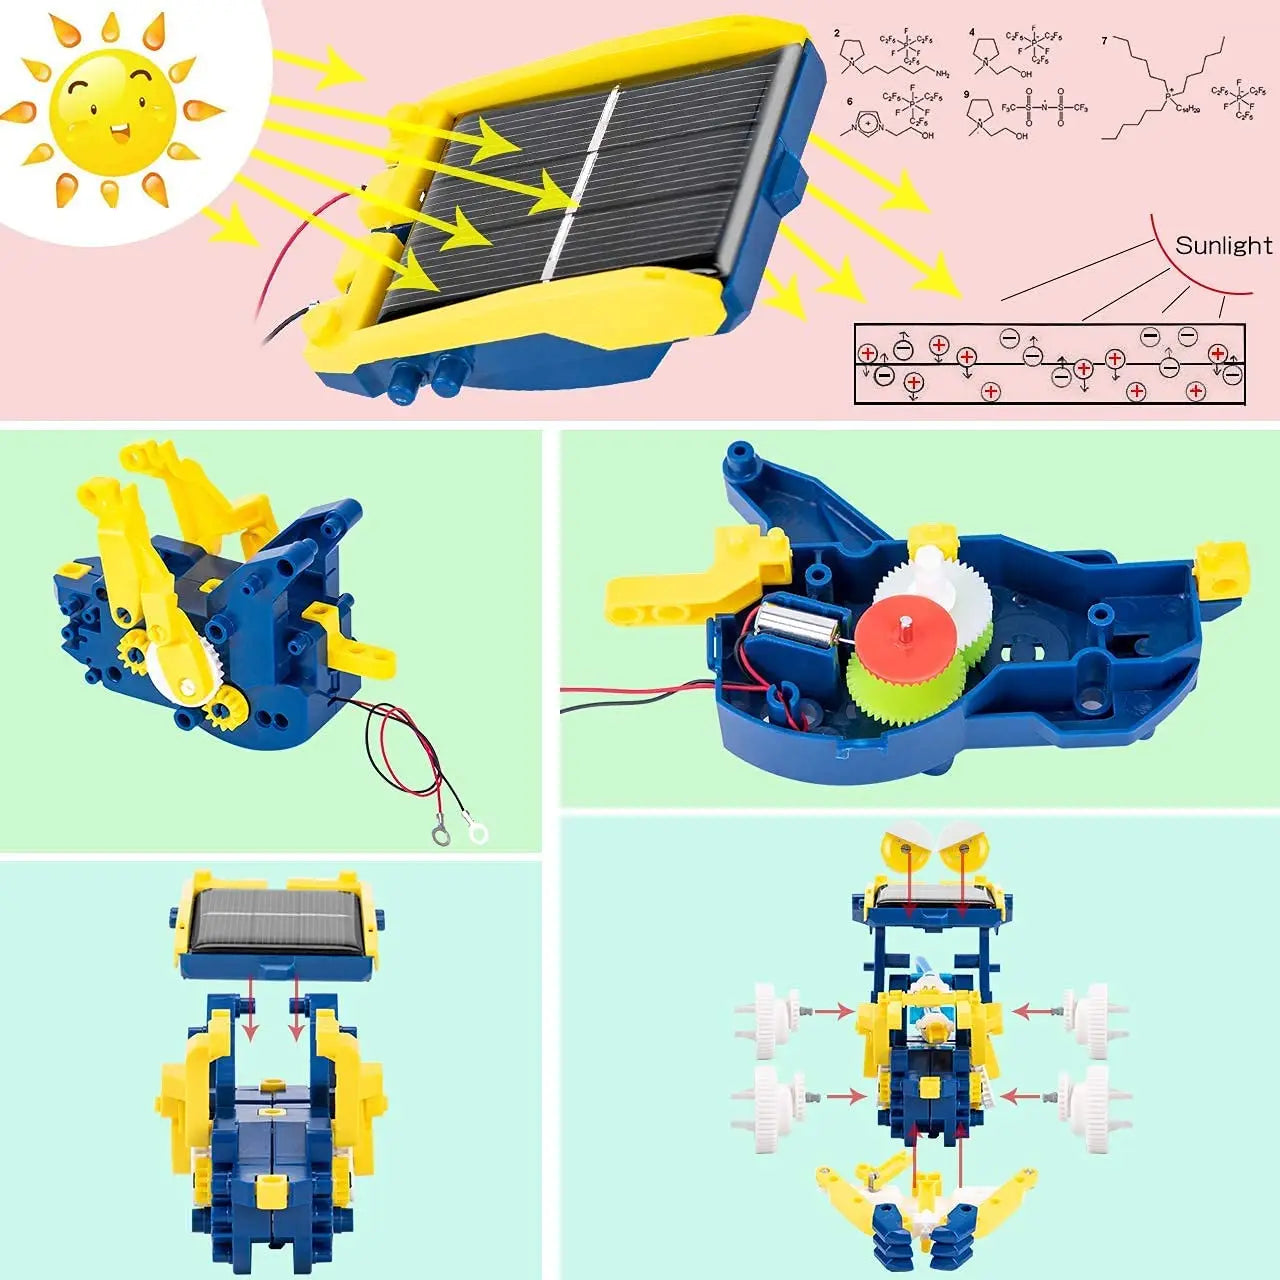 Solar Genius: 11-in-1 STEM Discovery Robot Kit - The Ultimate DIY Learning Adventure for Boys & Girls